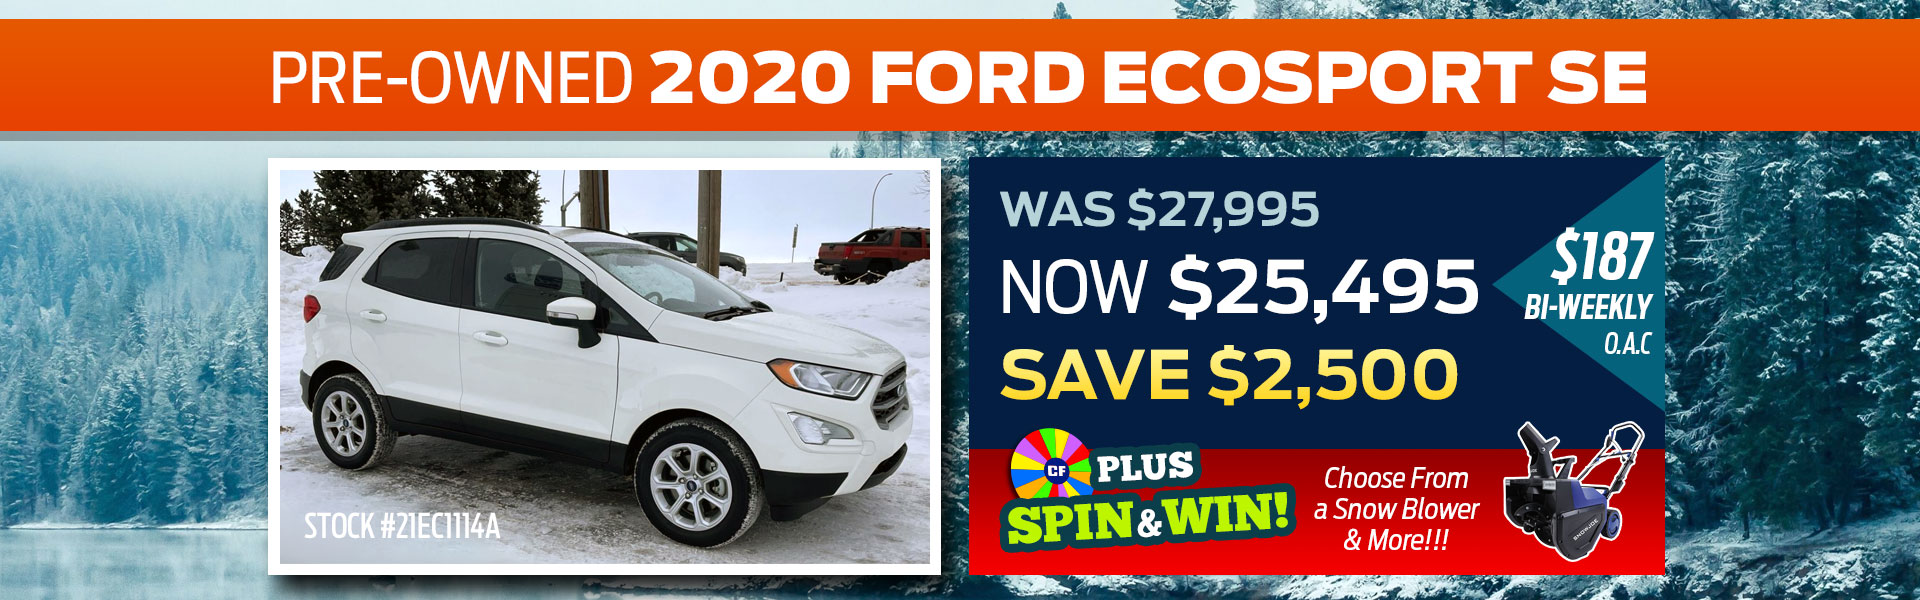 2020 Ford EcoSport SE Pre-Owned Sale Special